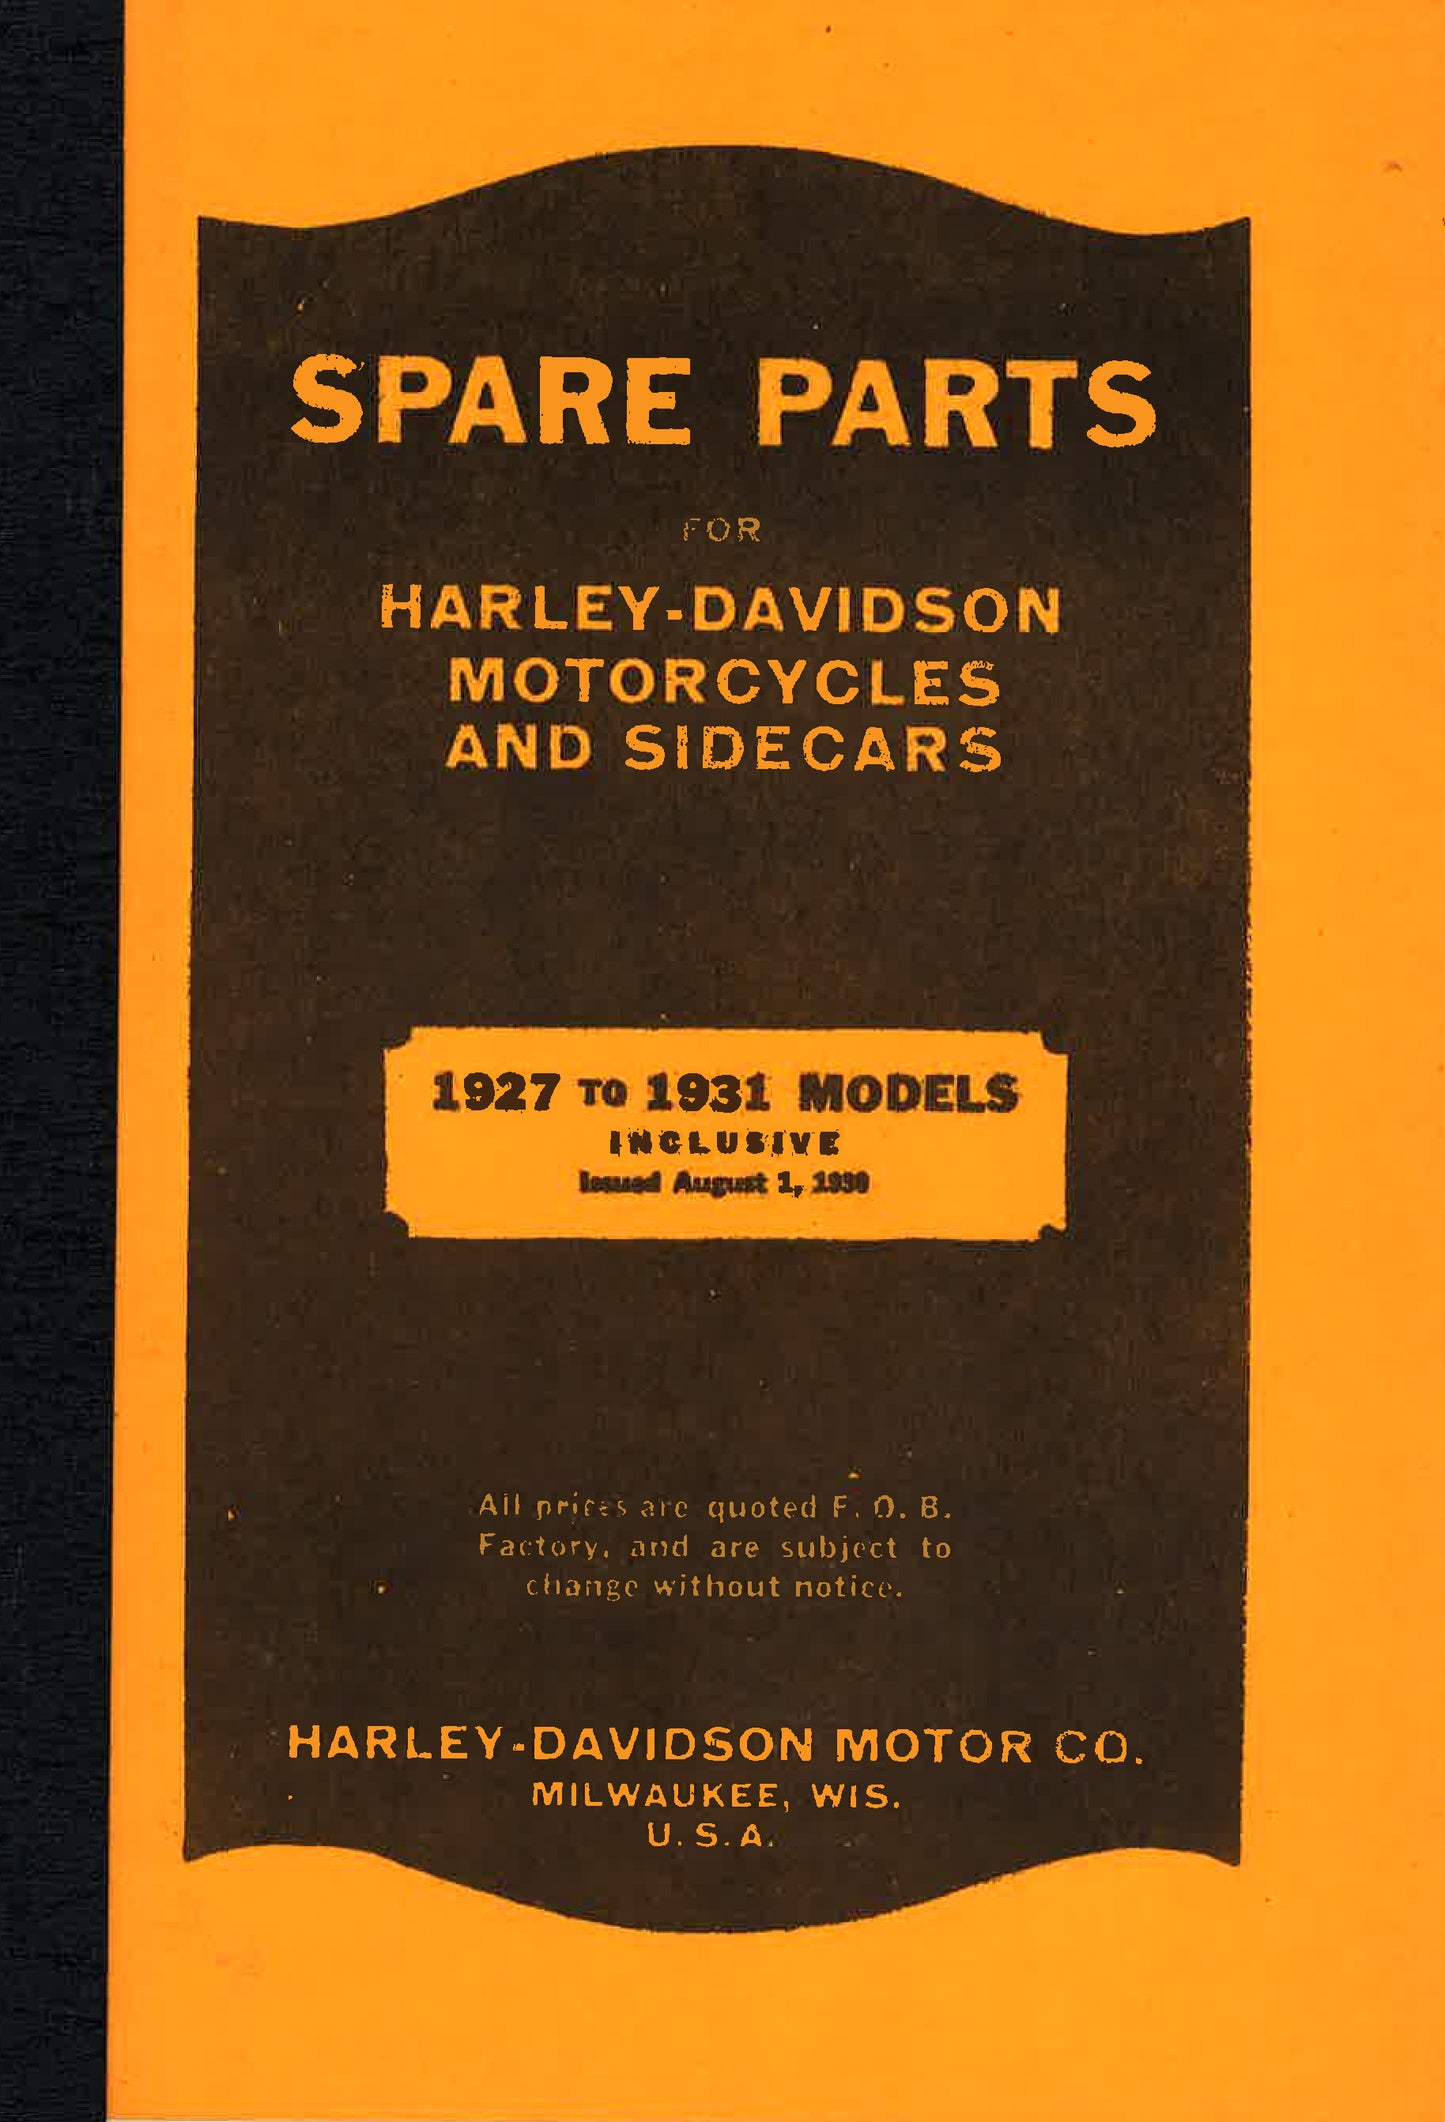 Spare Parts for Harley-Davidson Motorcycles and Sidecars, 1927 to 1931. Excellent Reprint